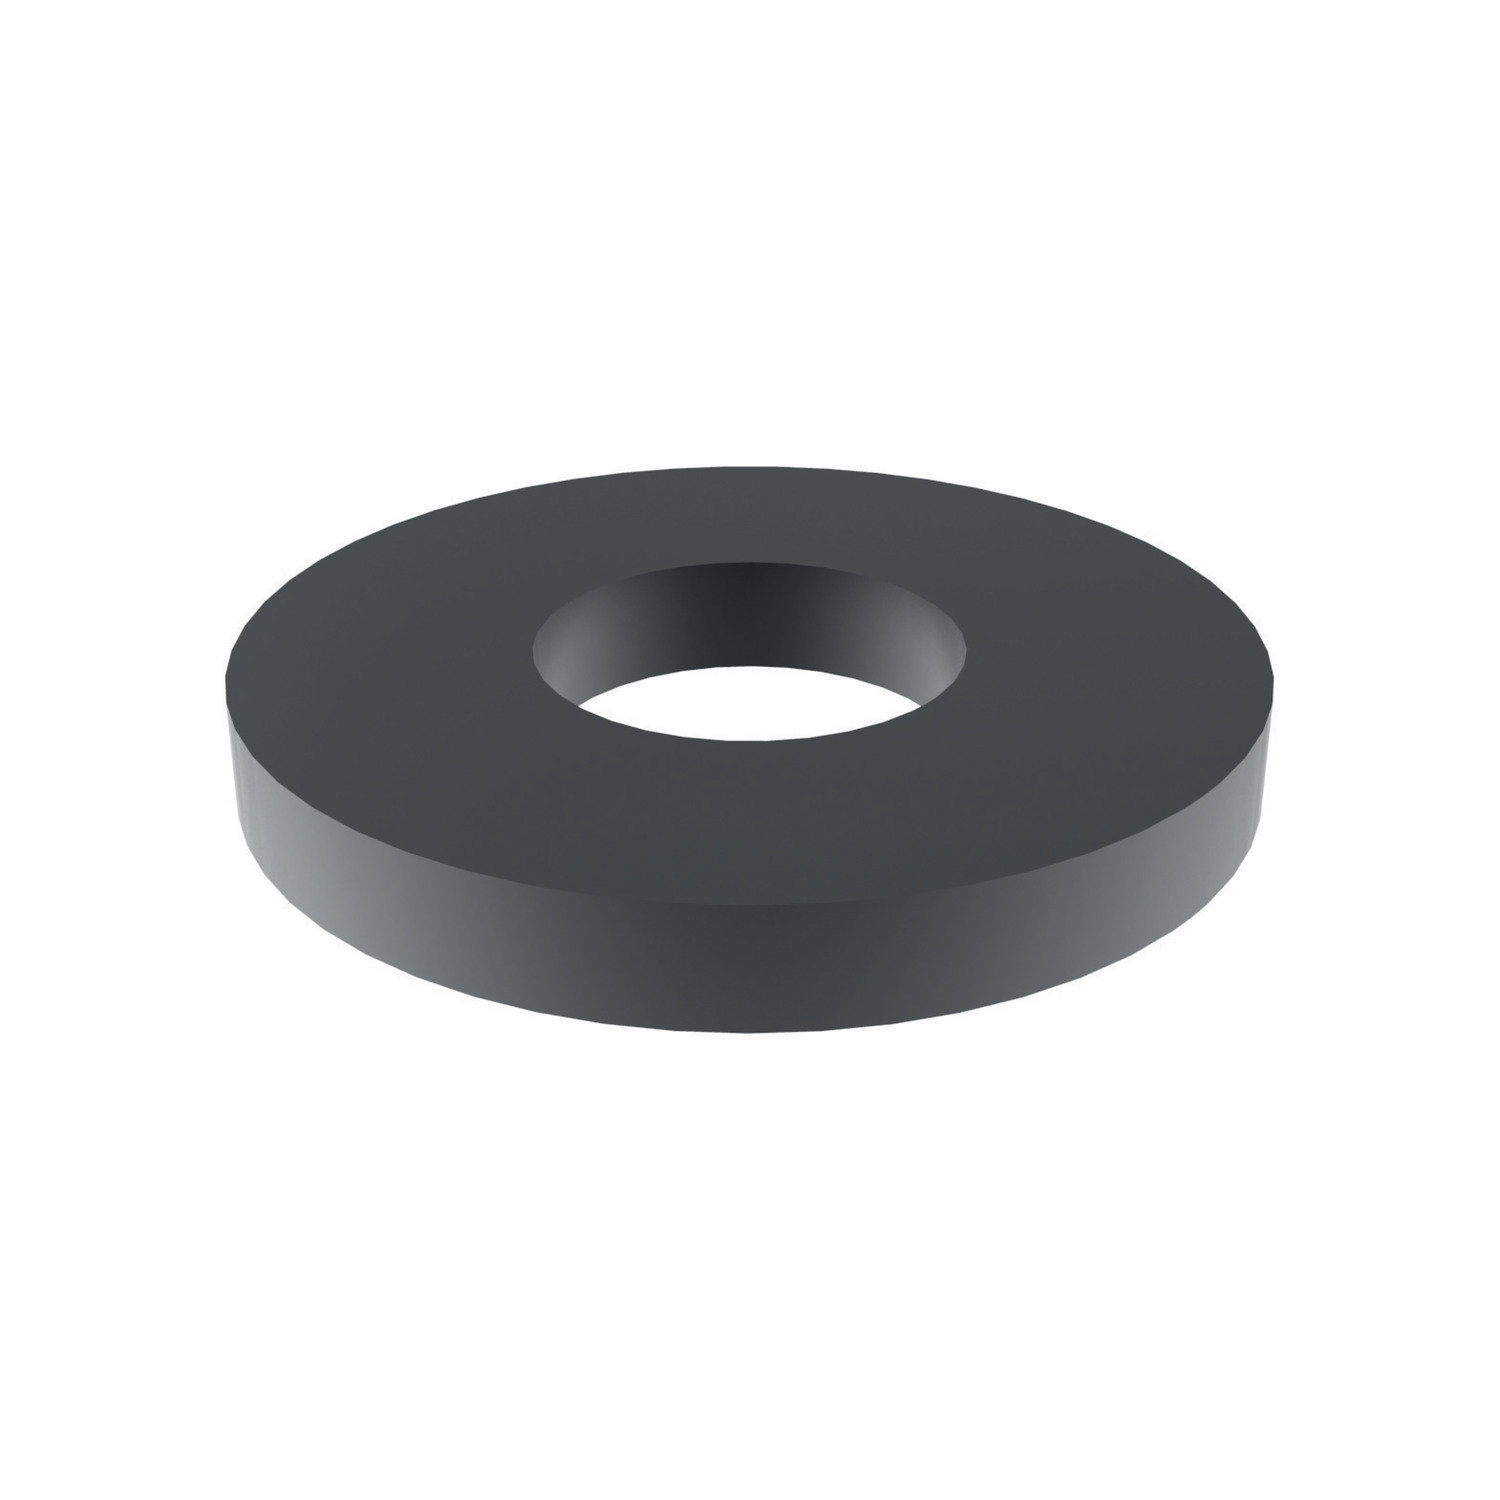 Plain Washers Plain washers are used to distribute the pressue of the nut evenly over the surface. Made from hardened steel and tempered (350 + 80 HV30).